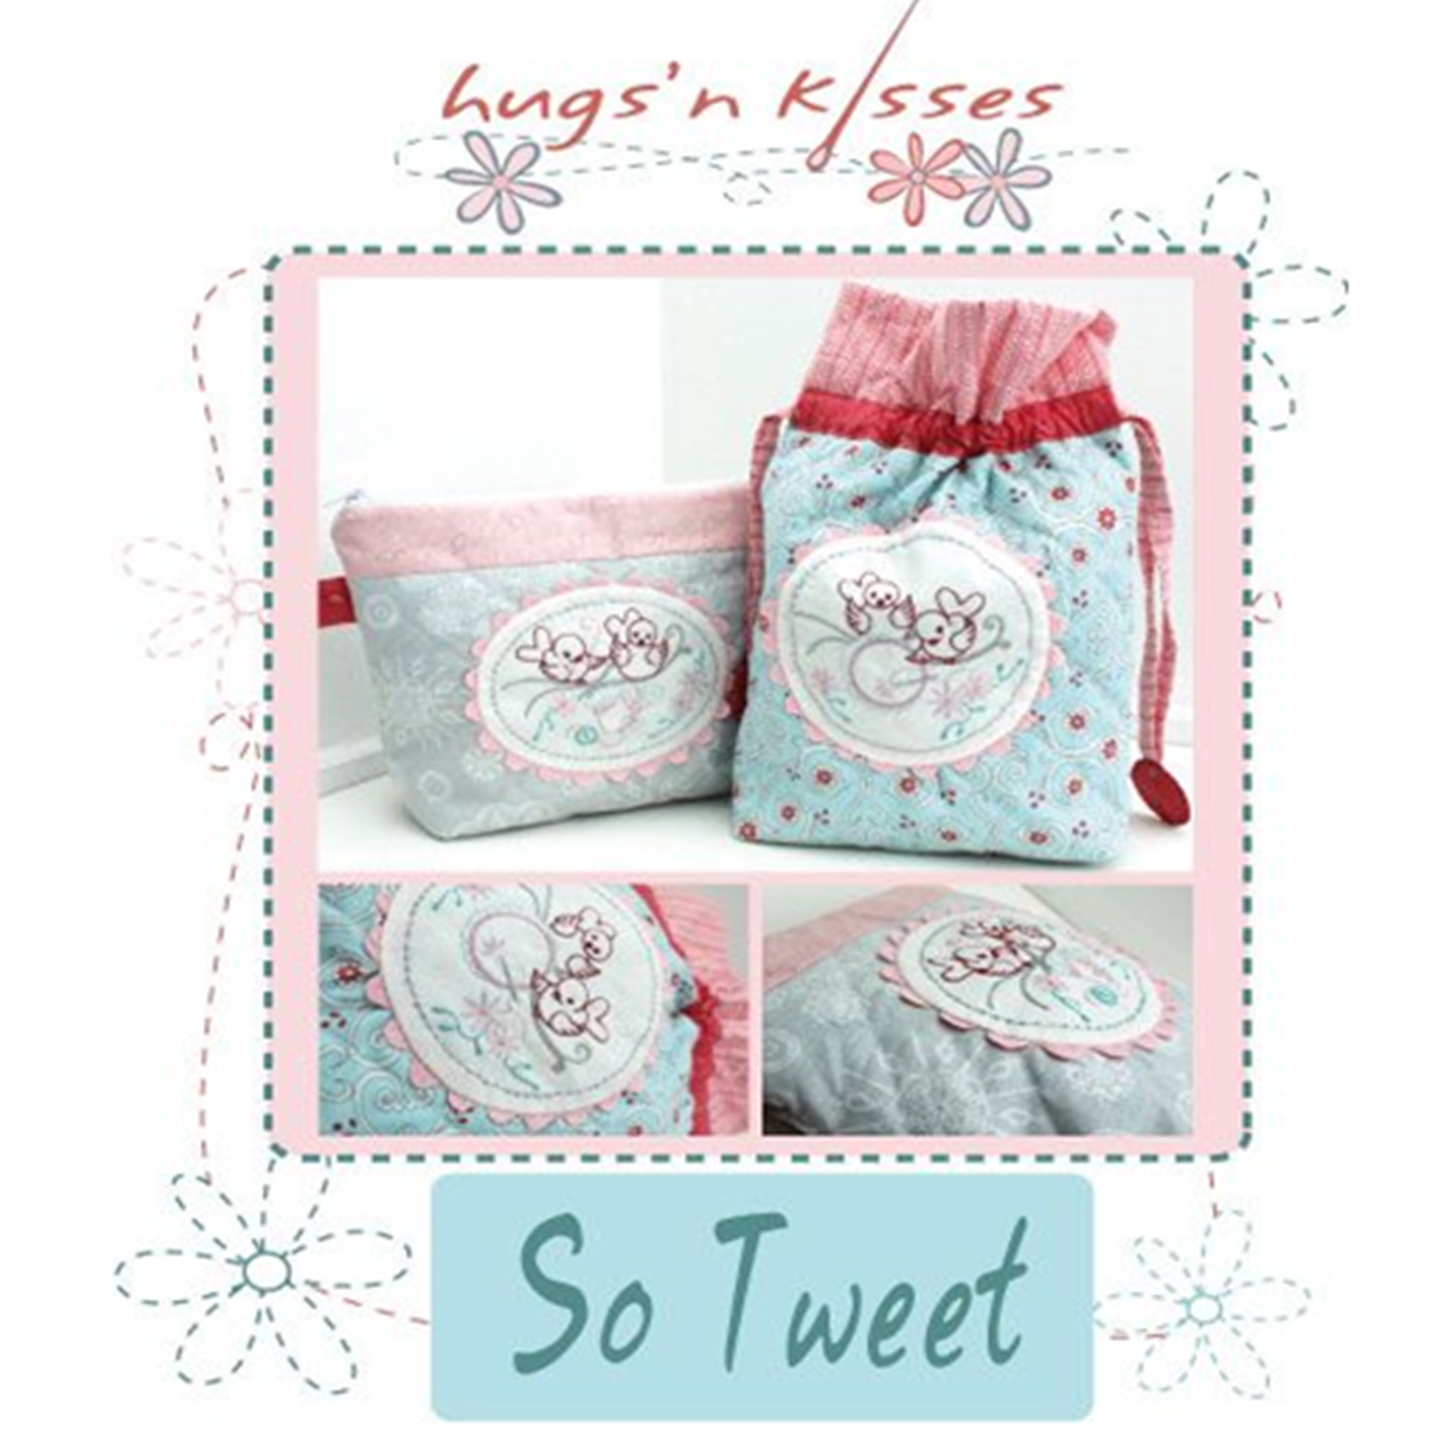 So Tweet zipper pouch and dilly bag Hugs 'N Kisses paper pattern with iron-on embroidery design